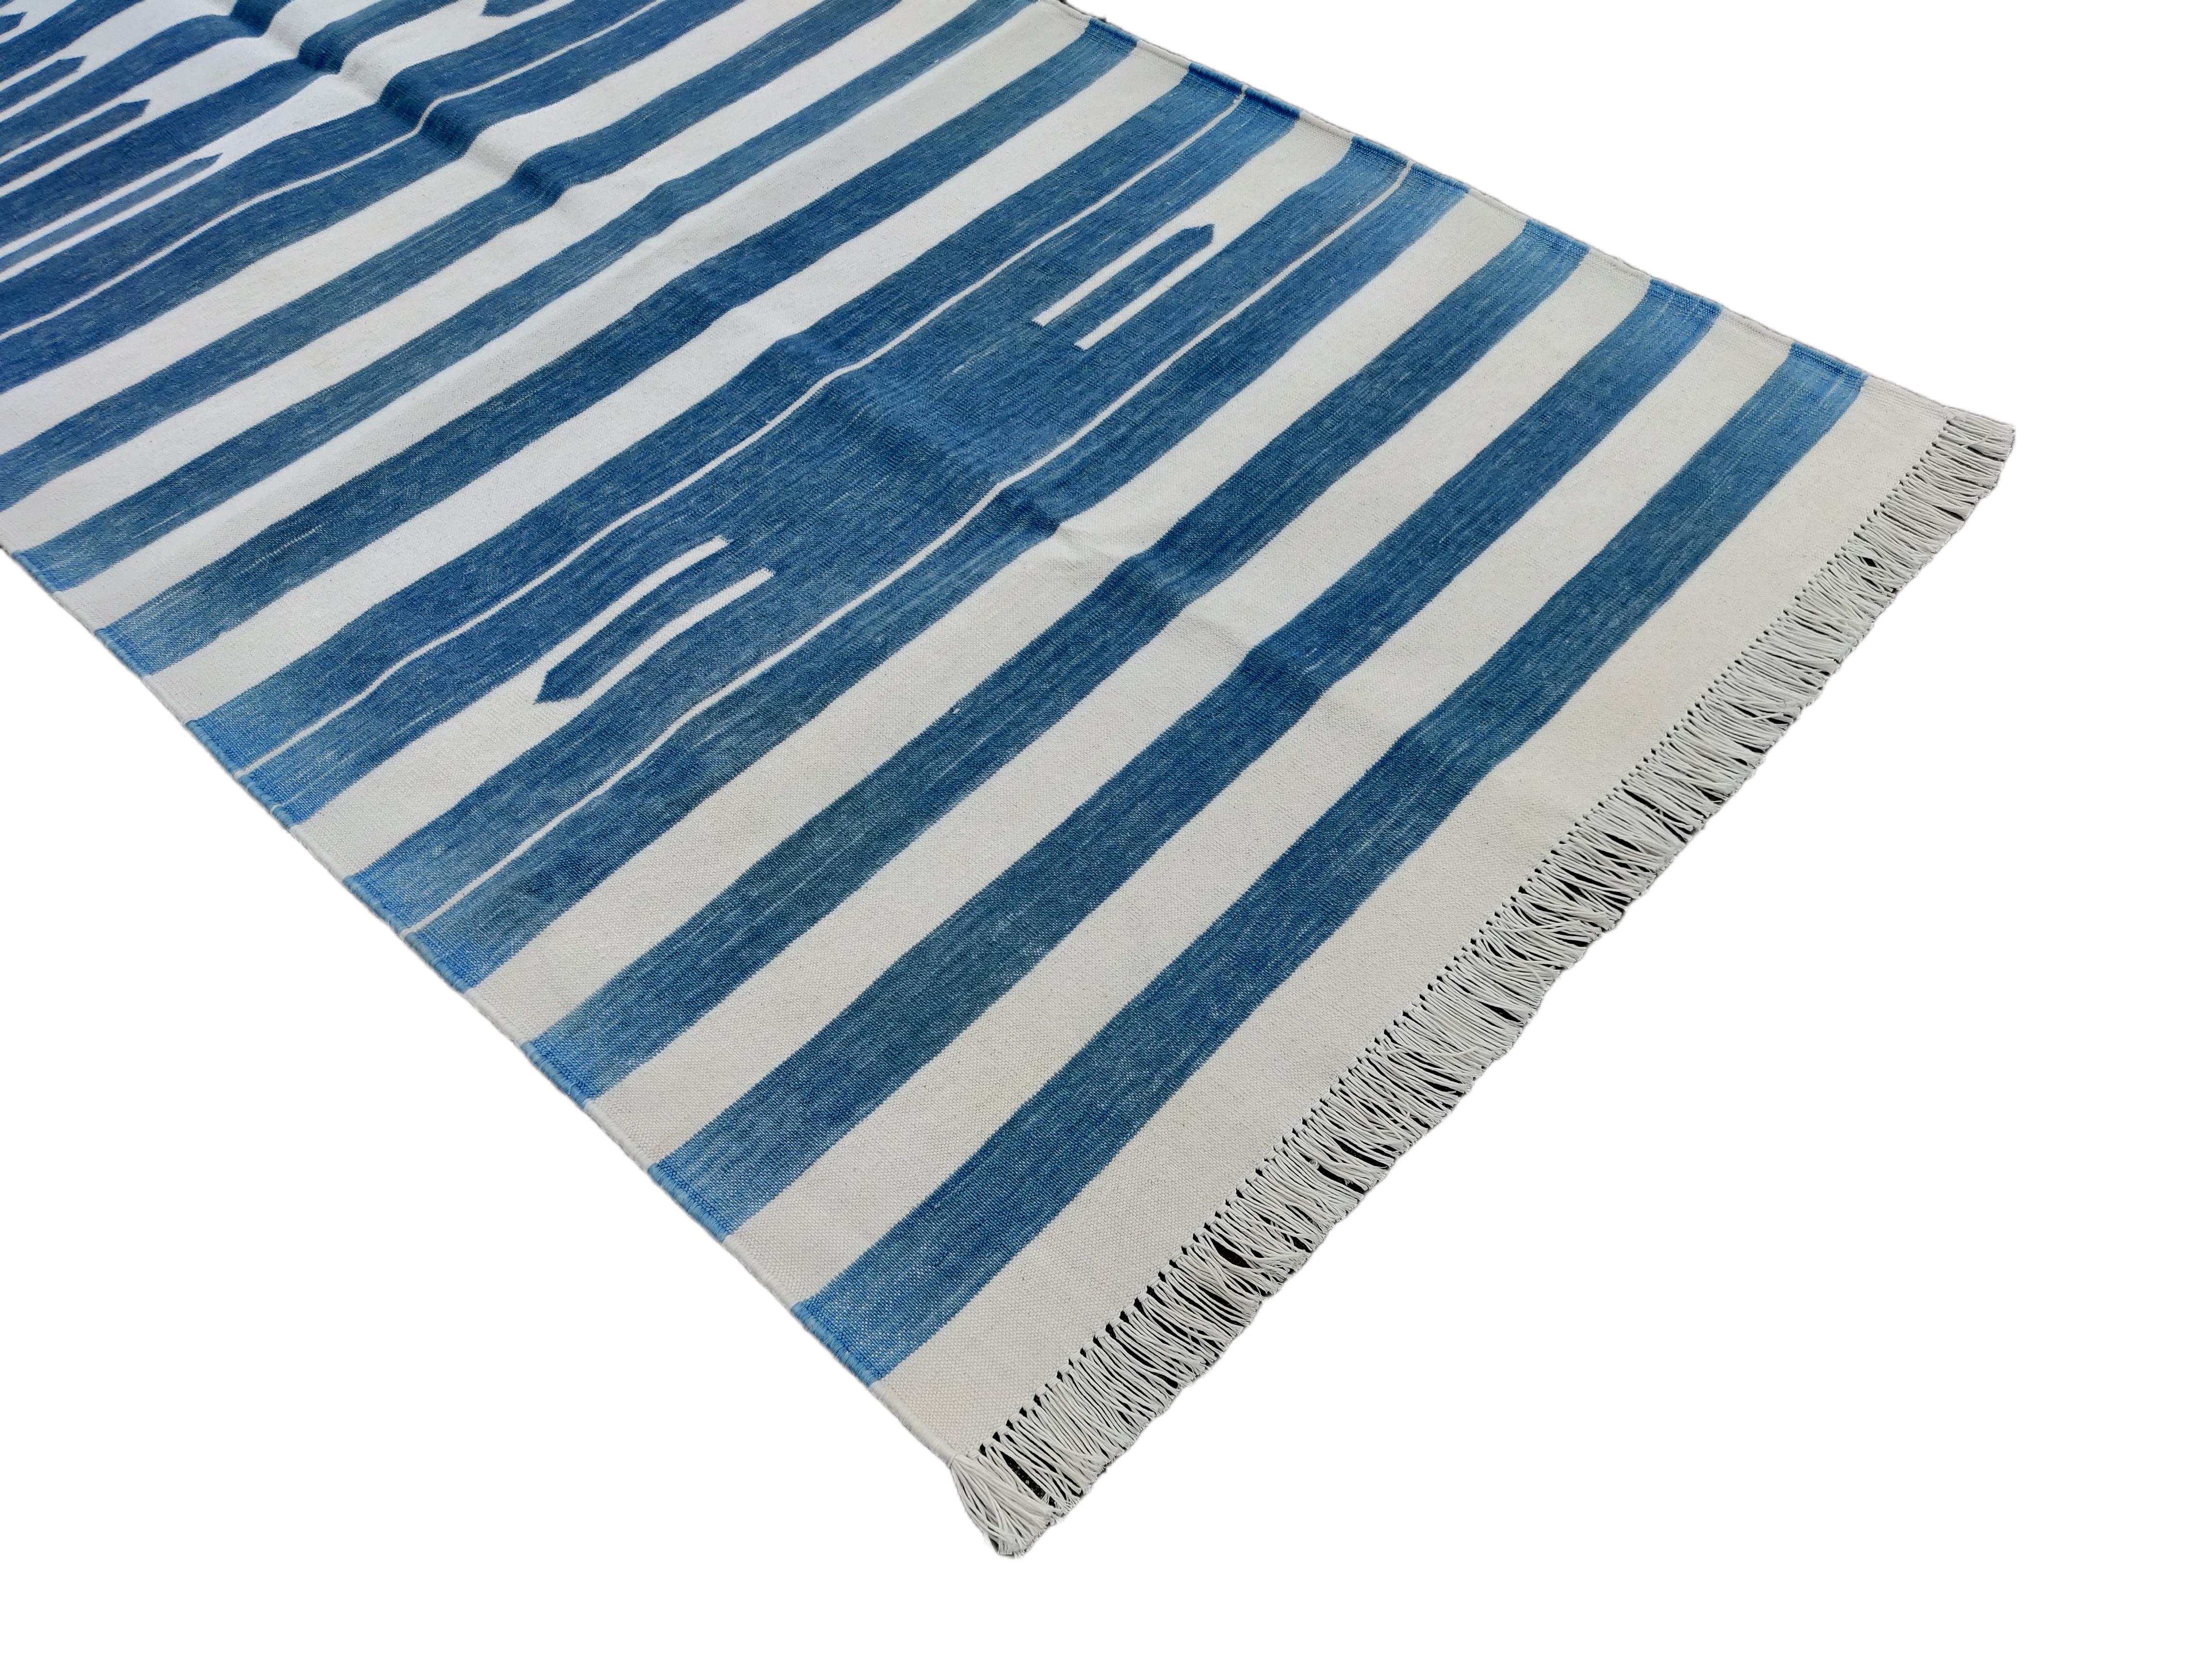 Handmade Cotton Area Flat Weave Runner, 3x8 Blue And White Striped Dhurrie Rug In New Condition For Sale In Jaipur, IN